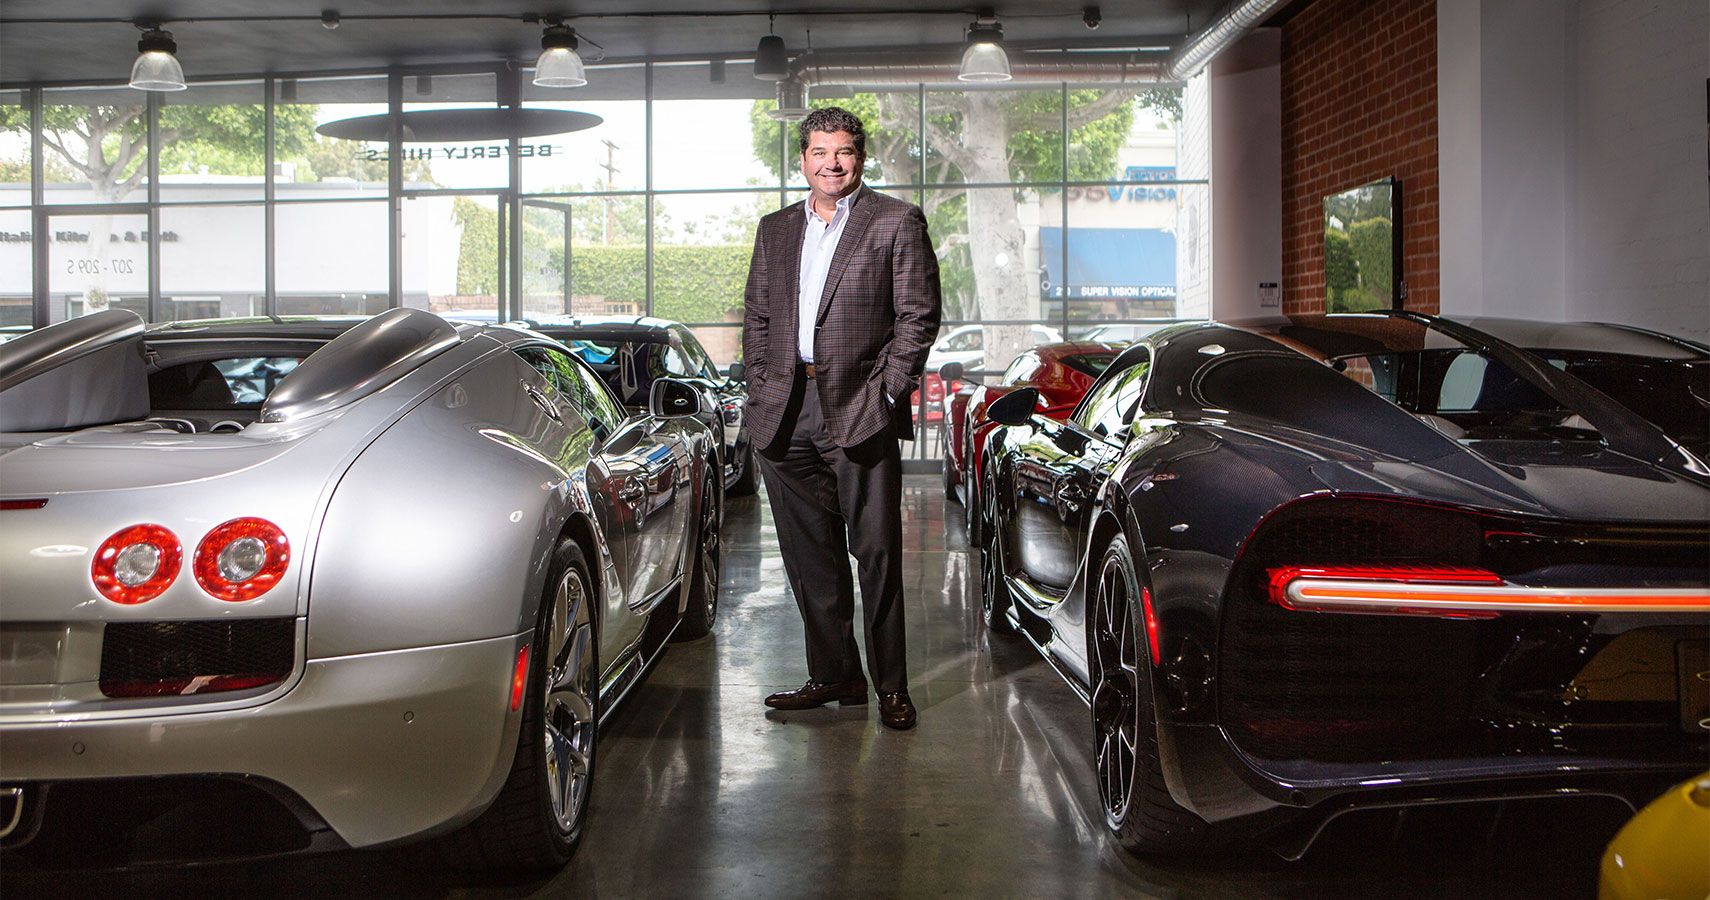 Steven Posner of Putnam Leasing with a car collection